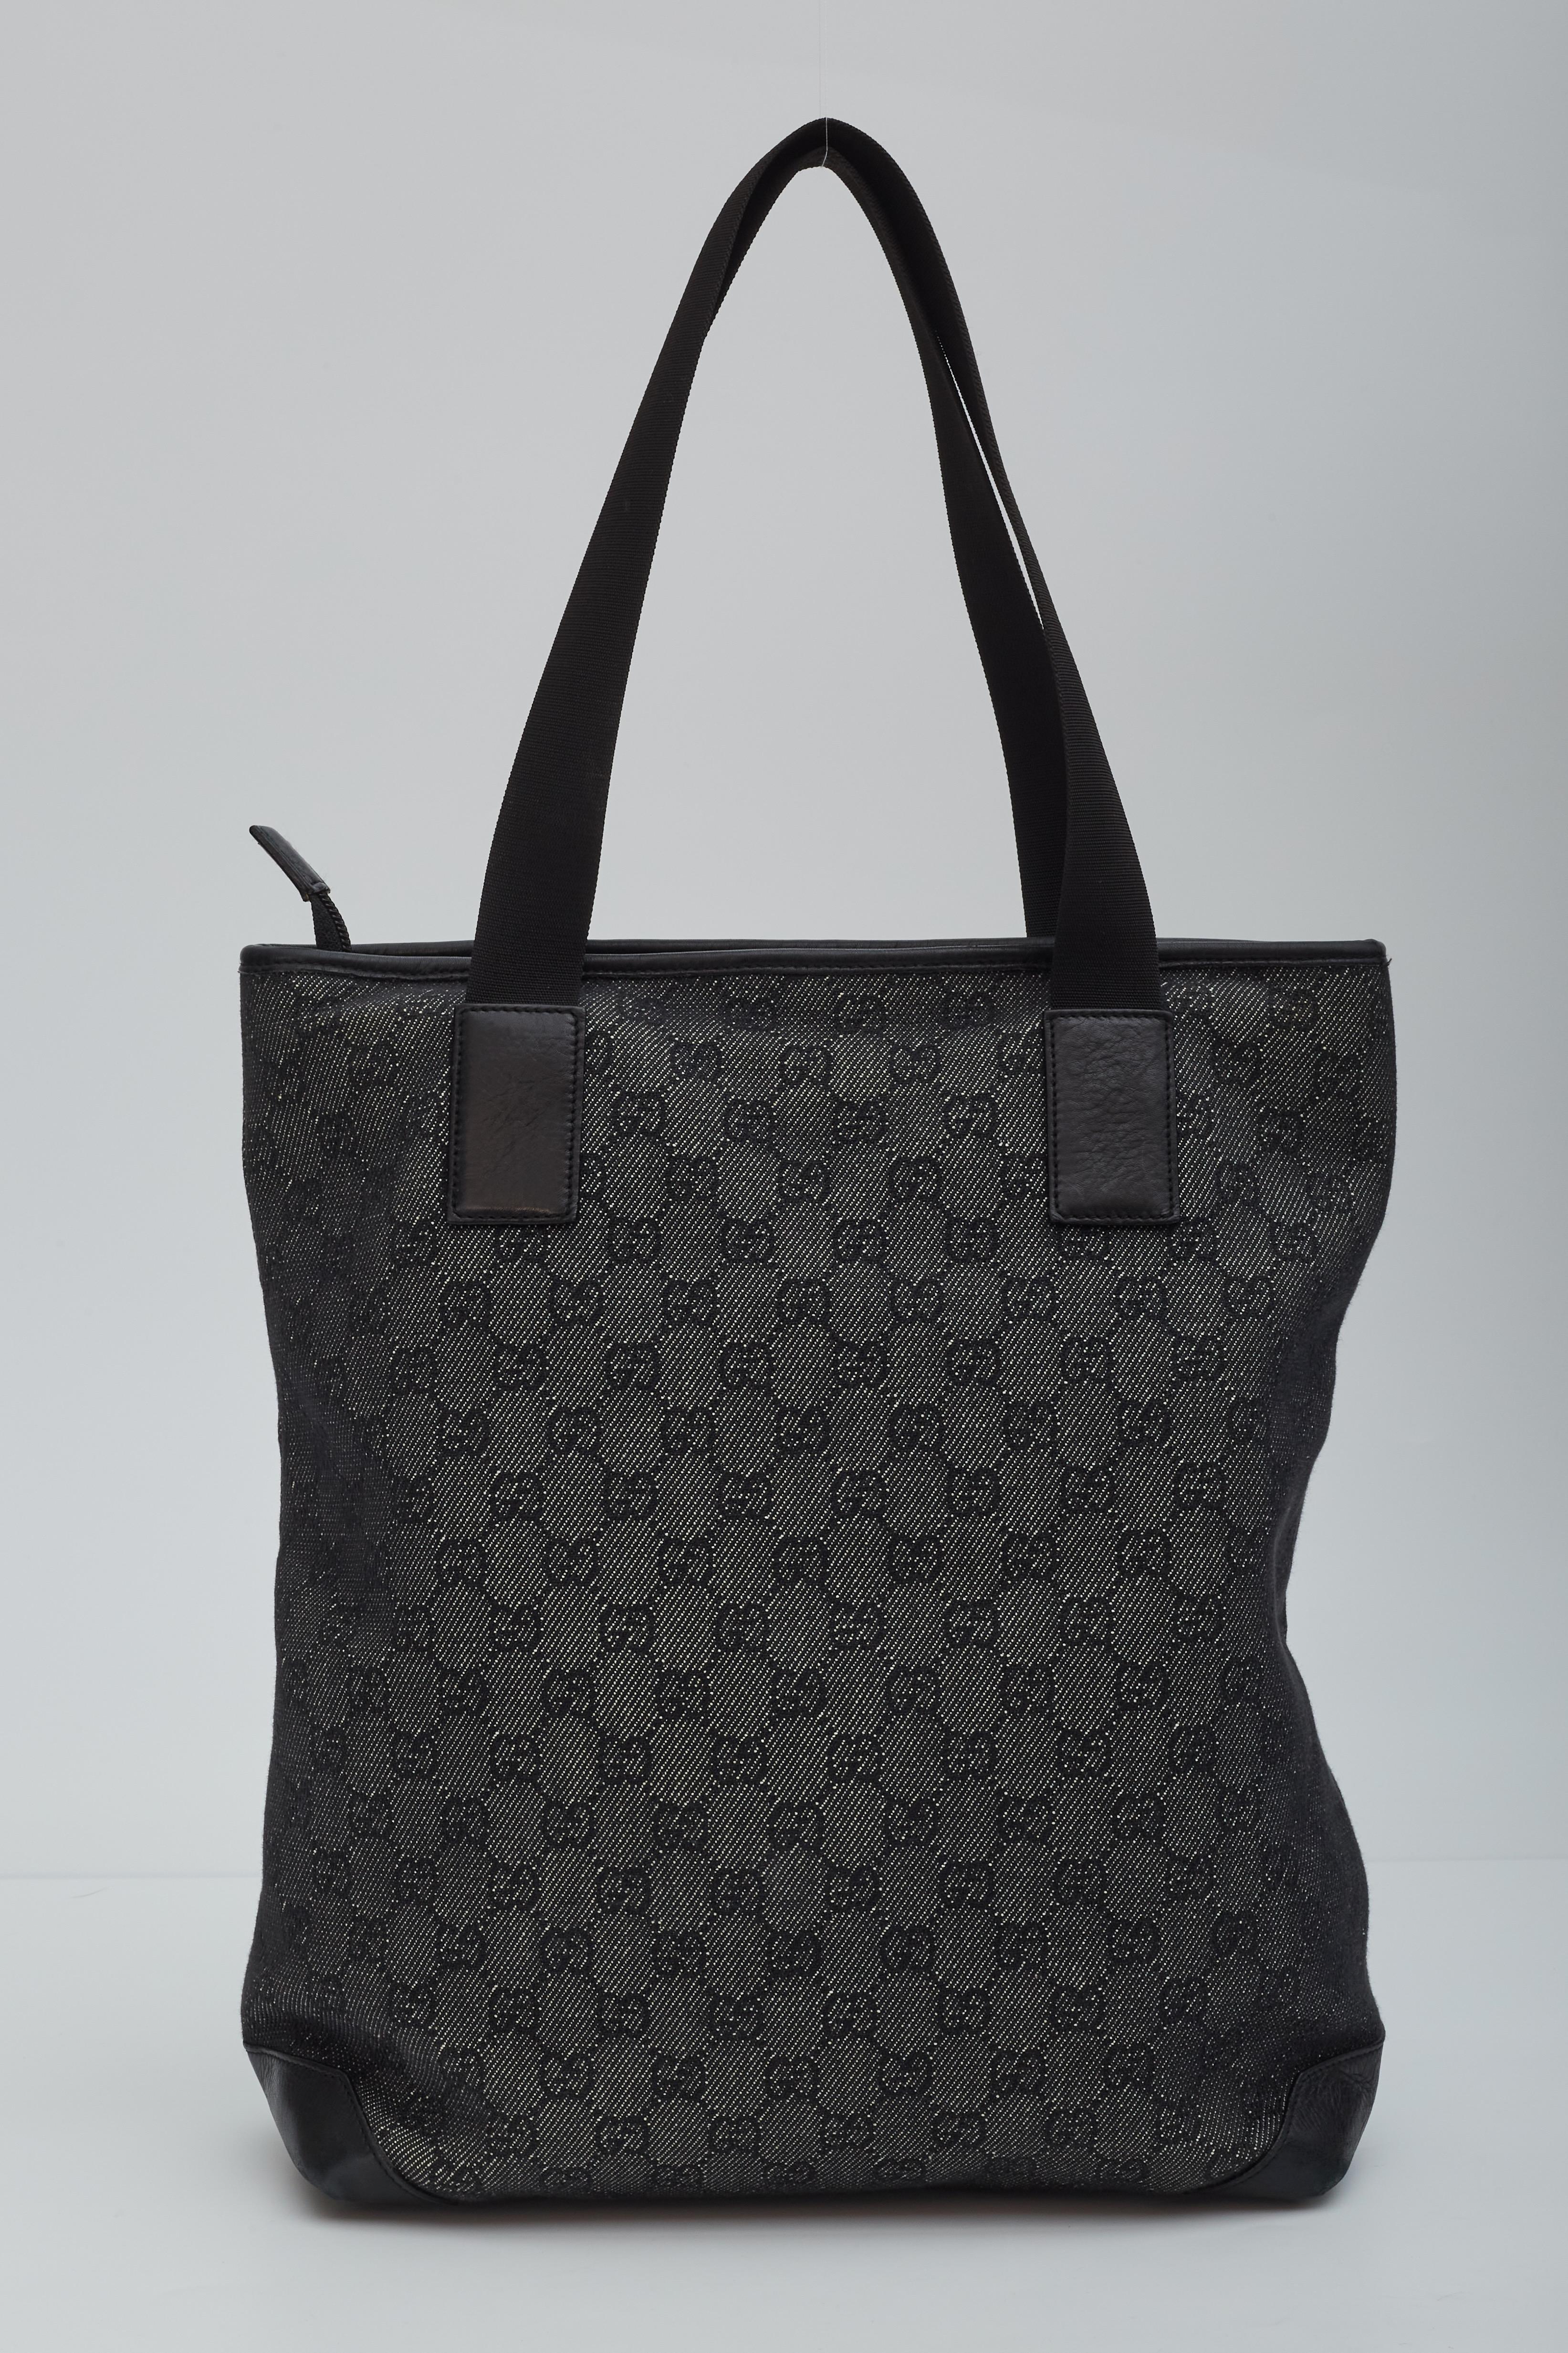 This bag is constructed of classic black Gucci GG monogram on canvas. The bag features smooth black leather trim, including base corners, a large external zipper pocket, and anchors that secure black nylon shoulder straps. The top zipper opens to a